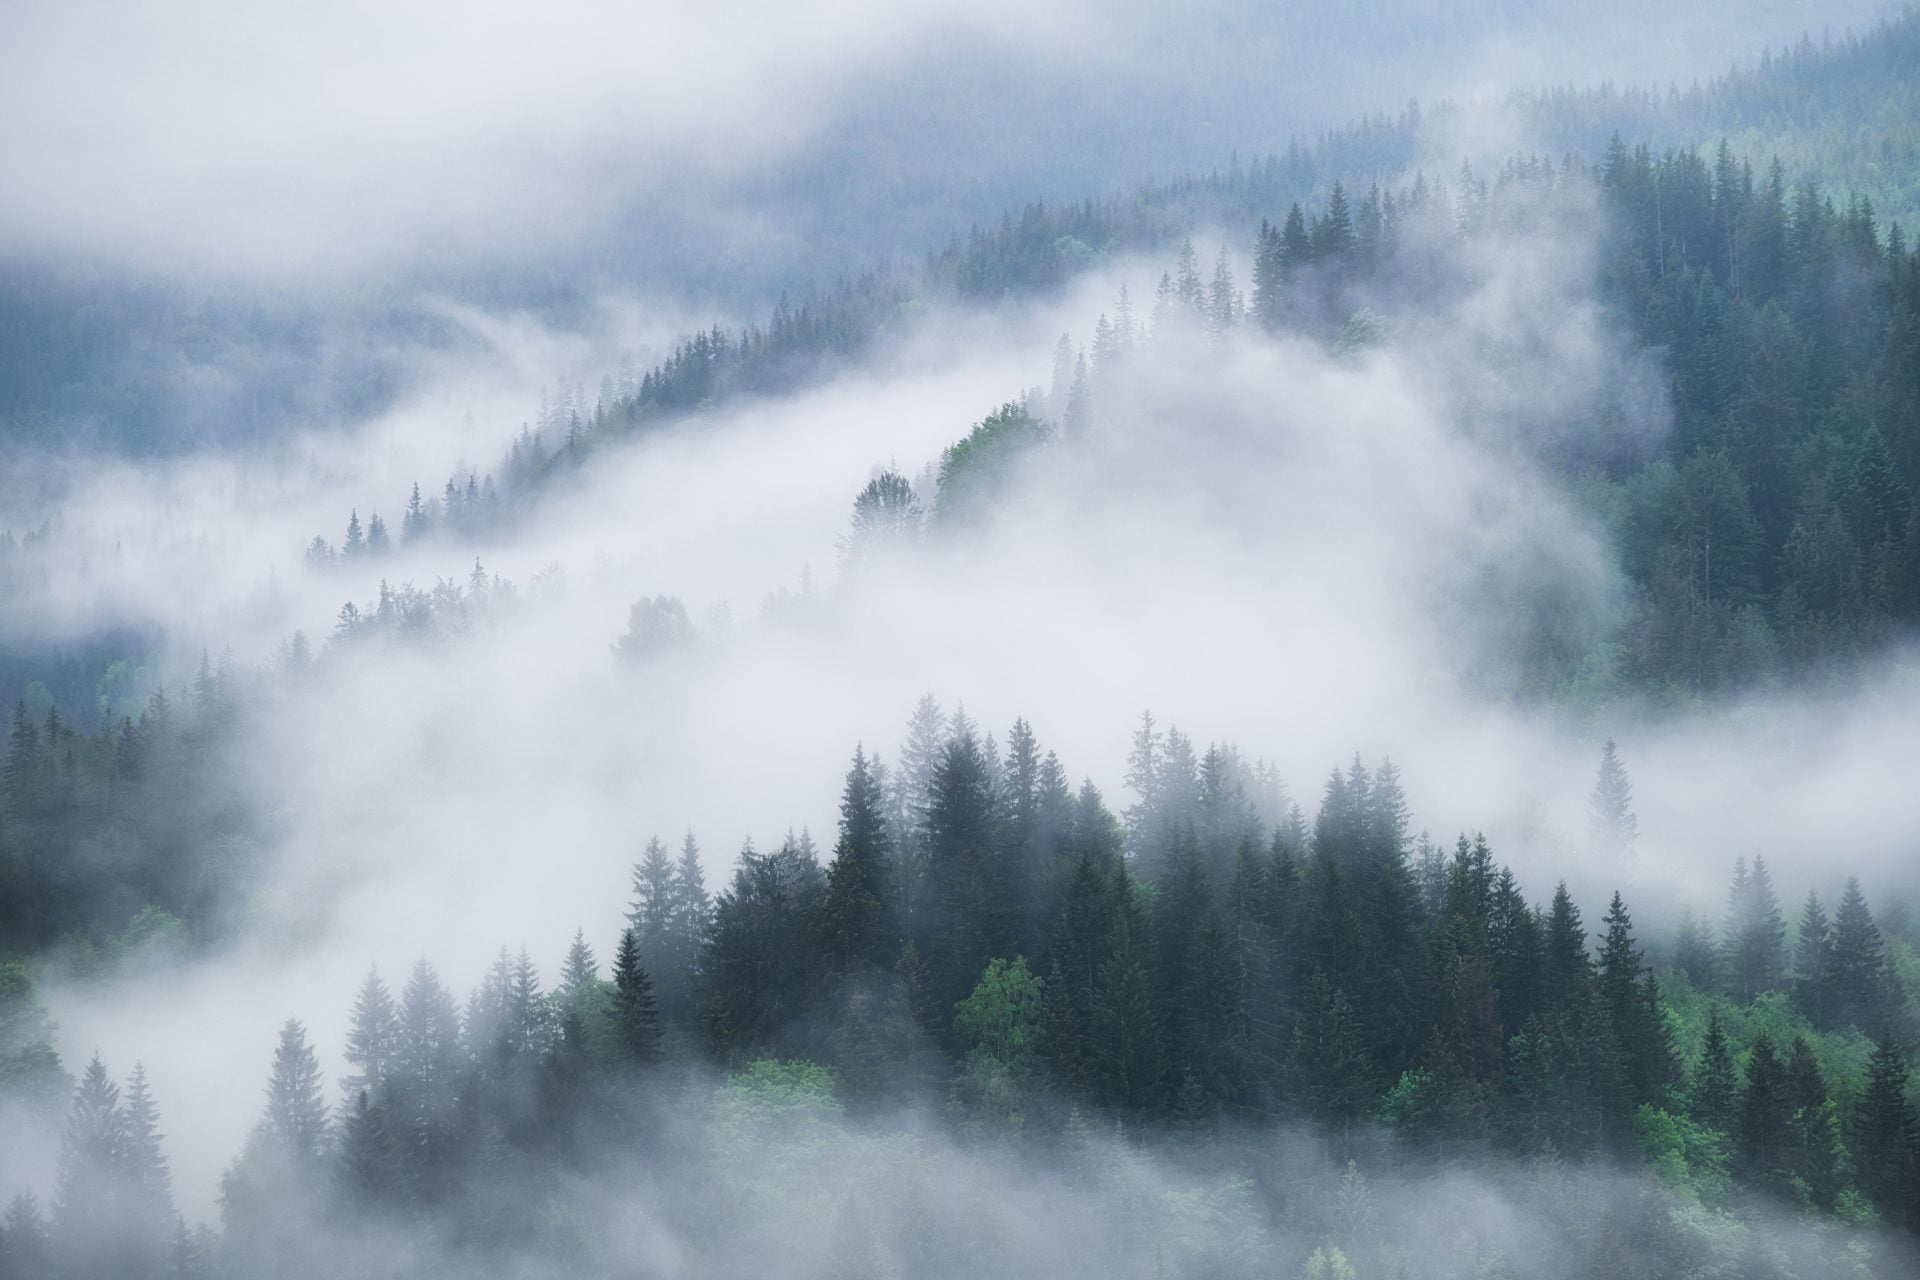 foggy-forest-in-the-mountains-landscape-with-tree-2021-09-03-13-30-46-utc